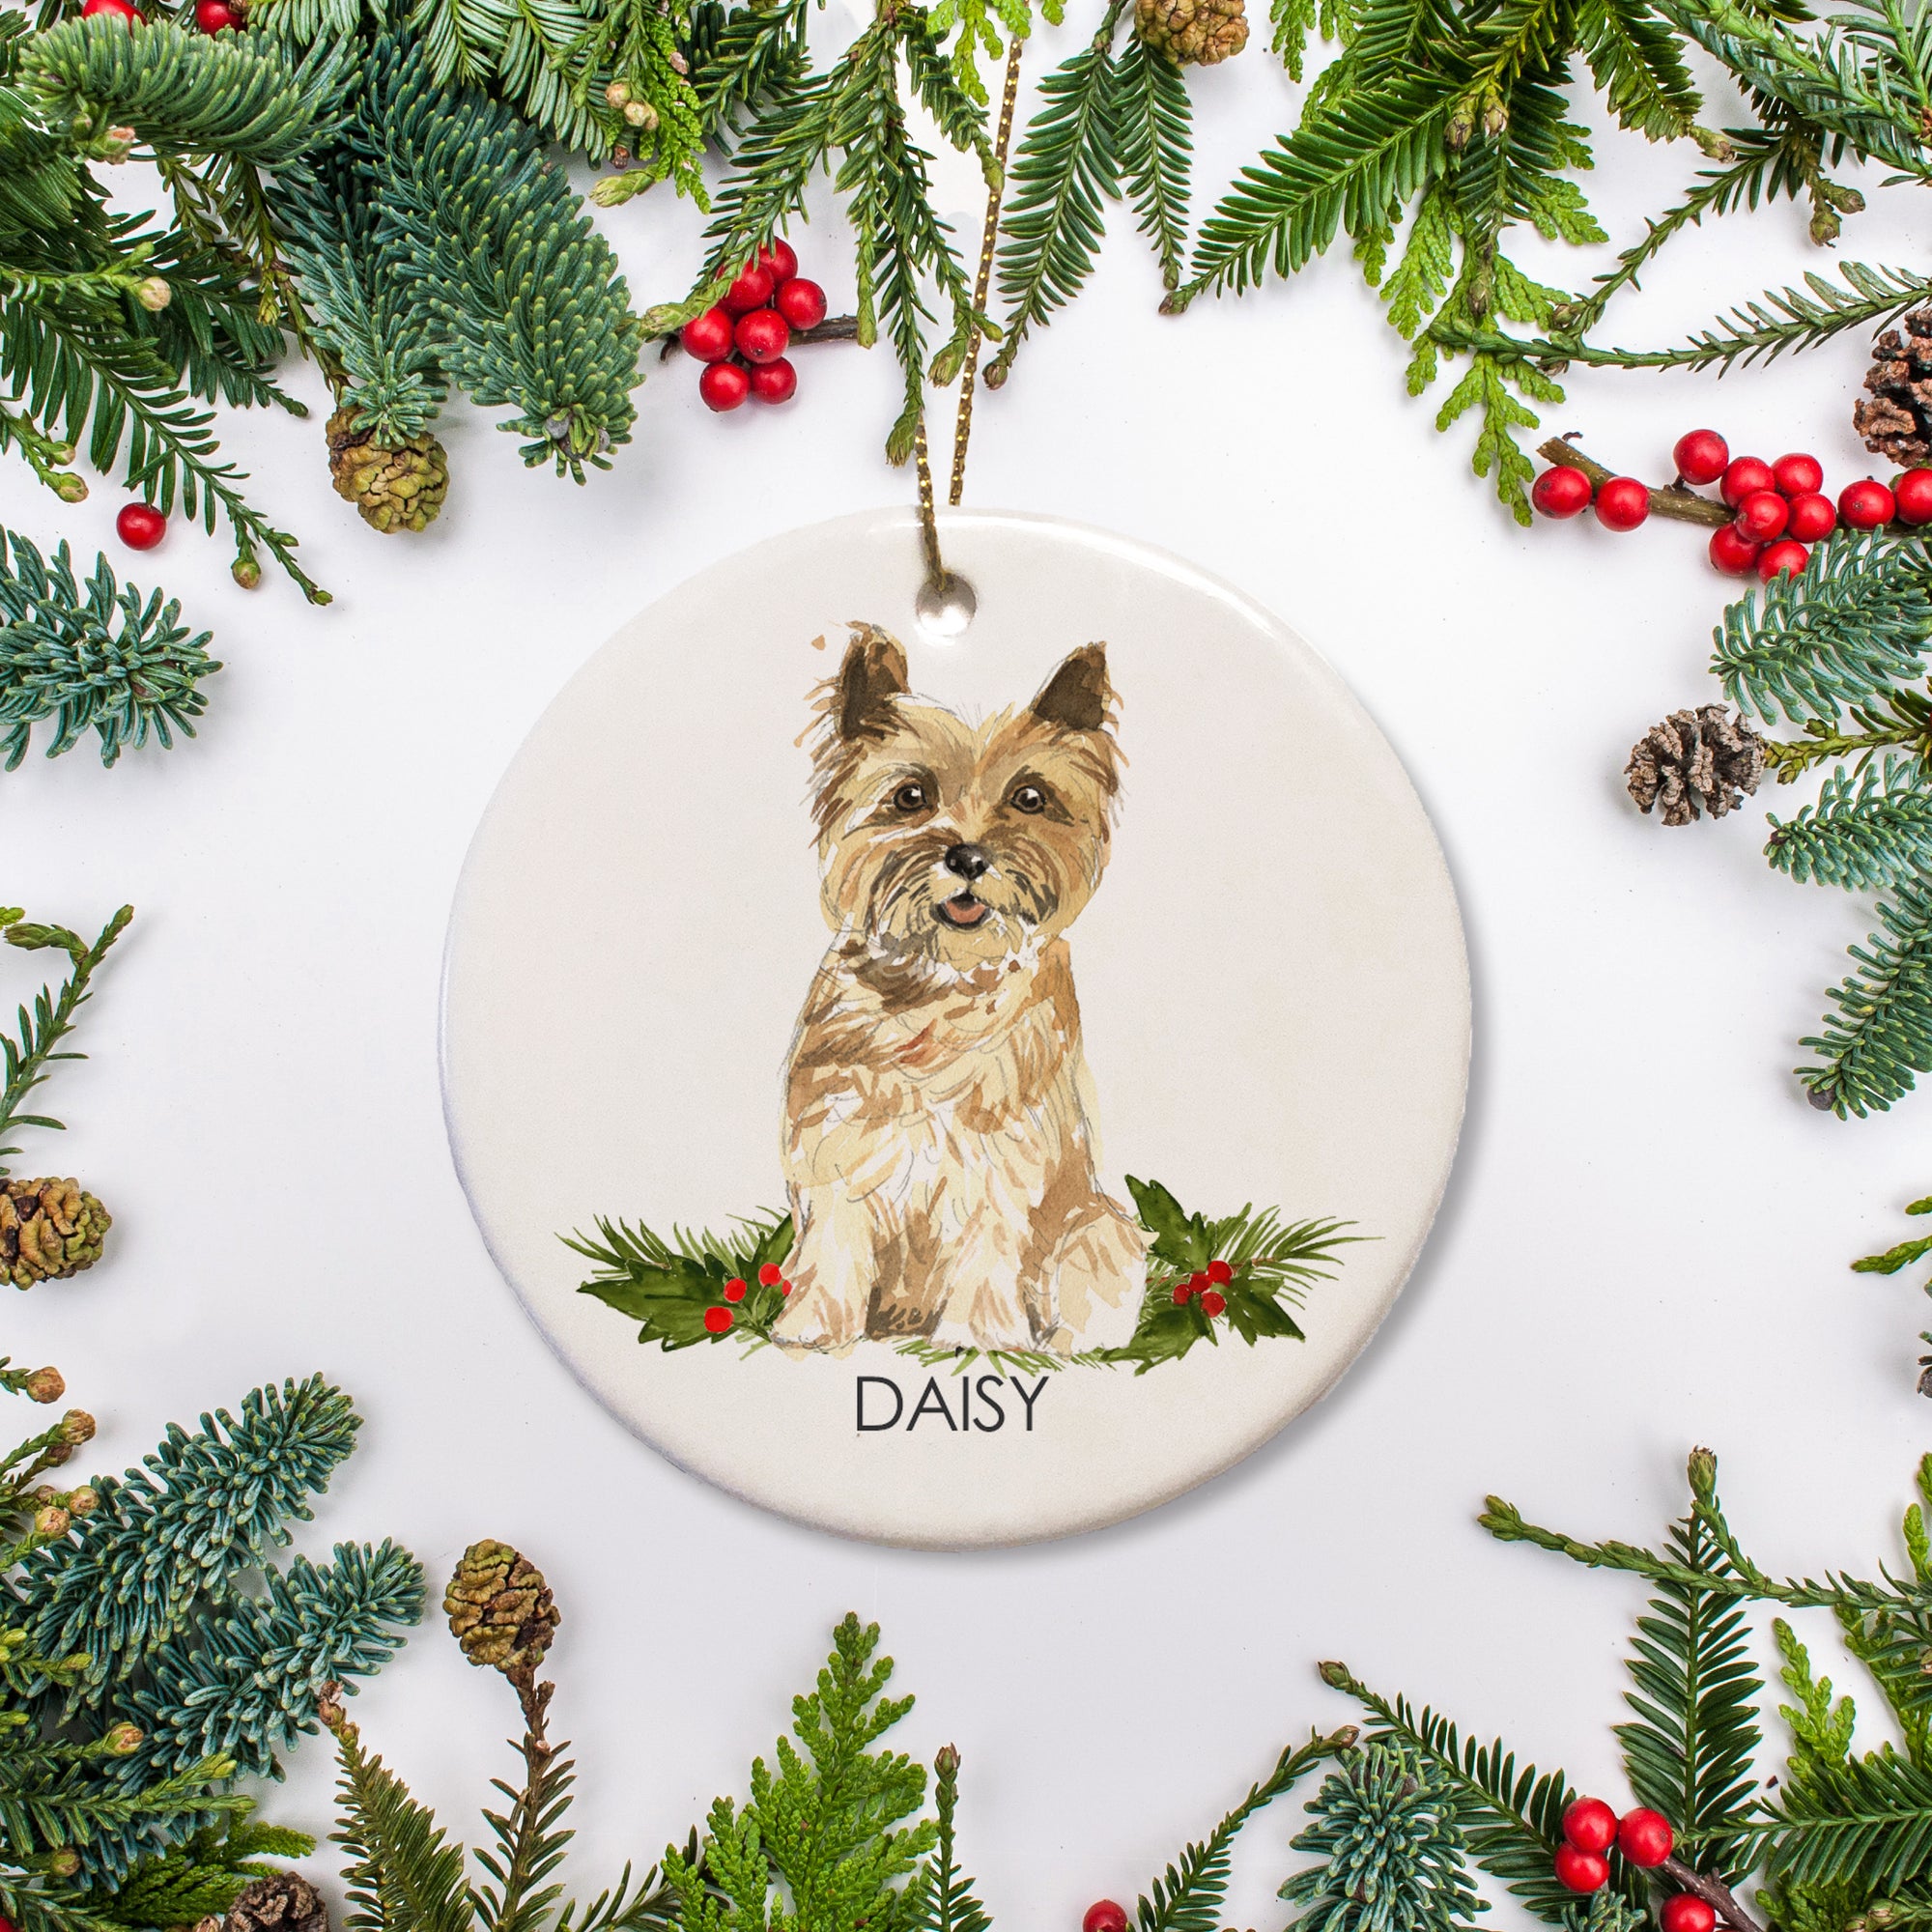 Cairn Terrier dog personalized Christmas Ornament, ceramic